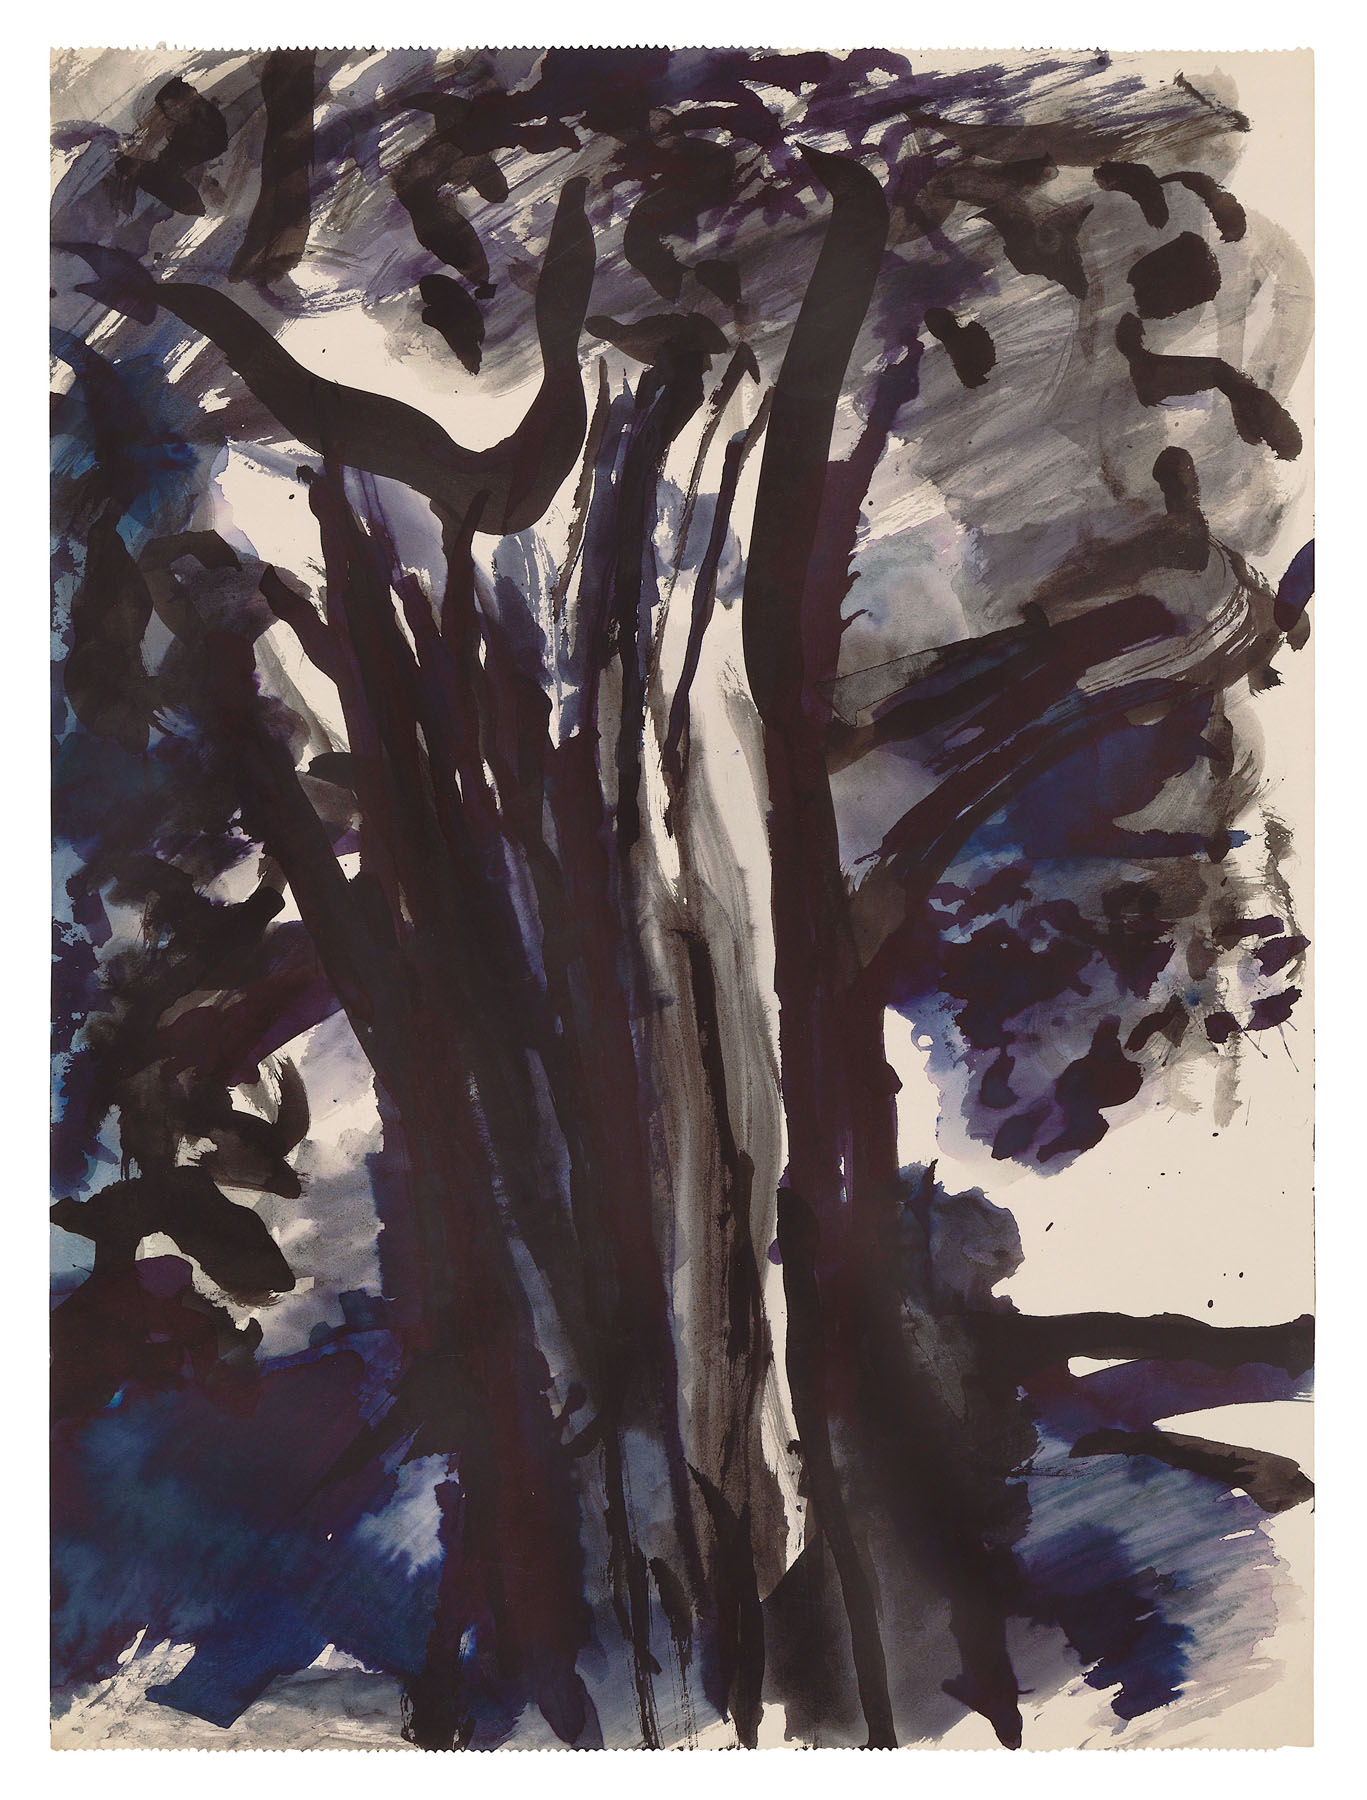 Tree, c. 1960. Black ink and watercolour on paper, 15.7 x 11.6 in. (40 x 29.5 cm). Private collection. Photo Malcolm Varon ©Bianca Stock